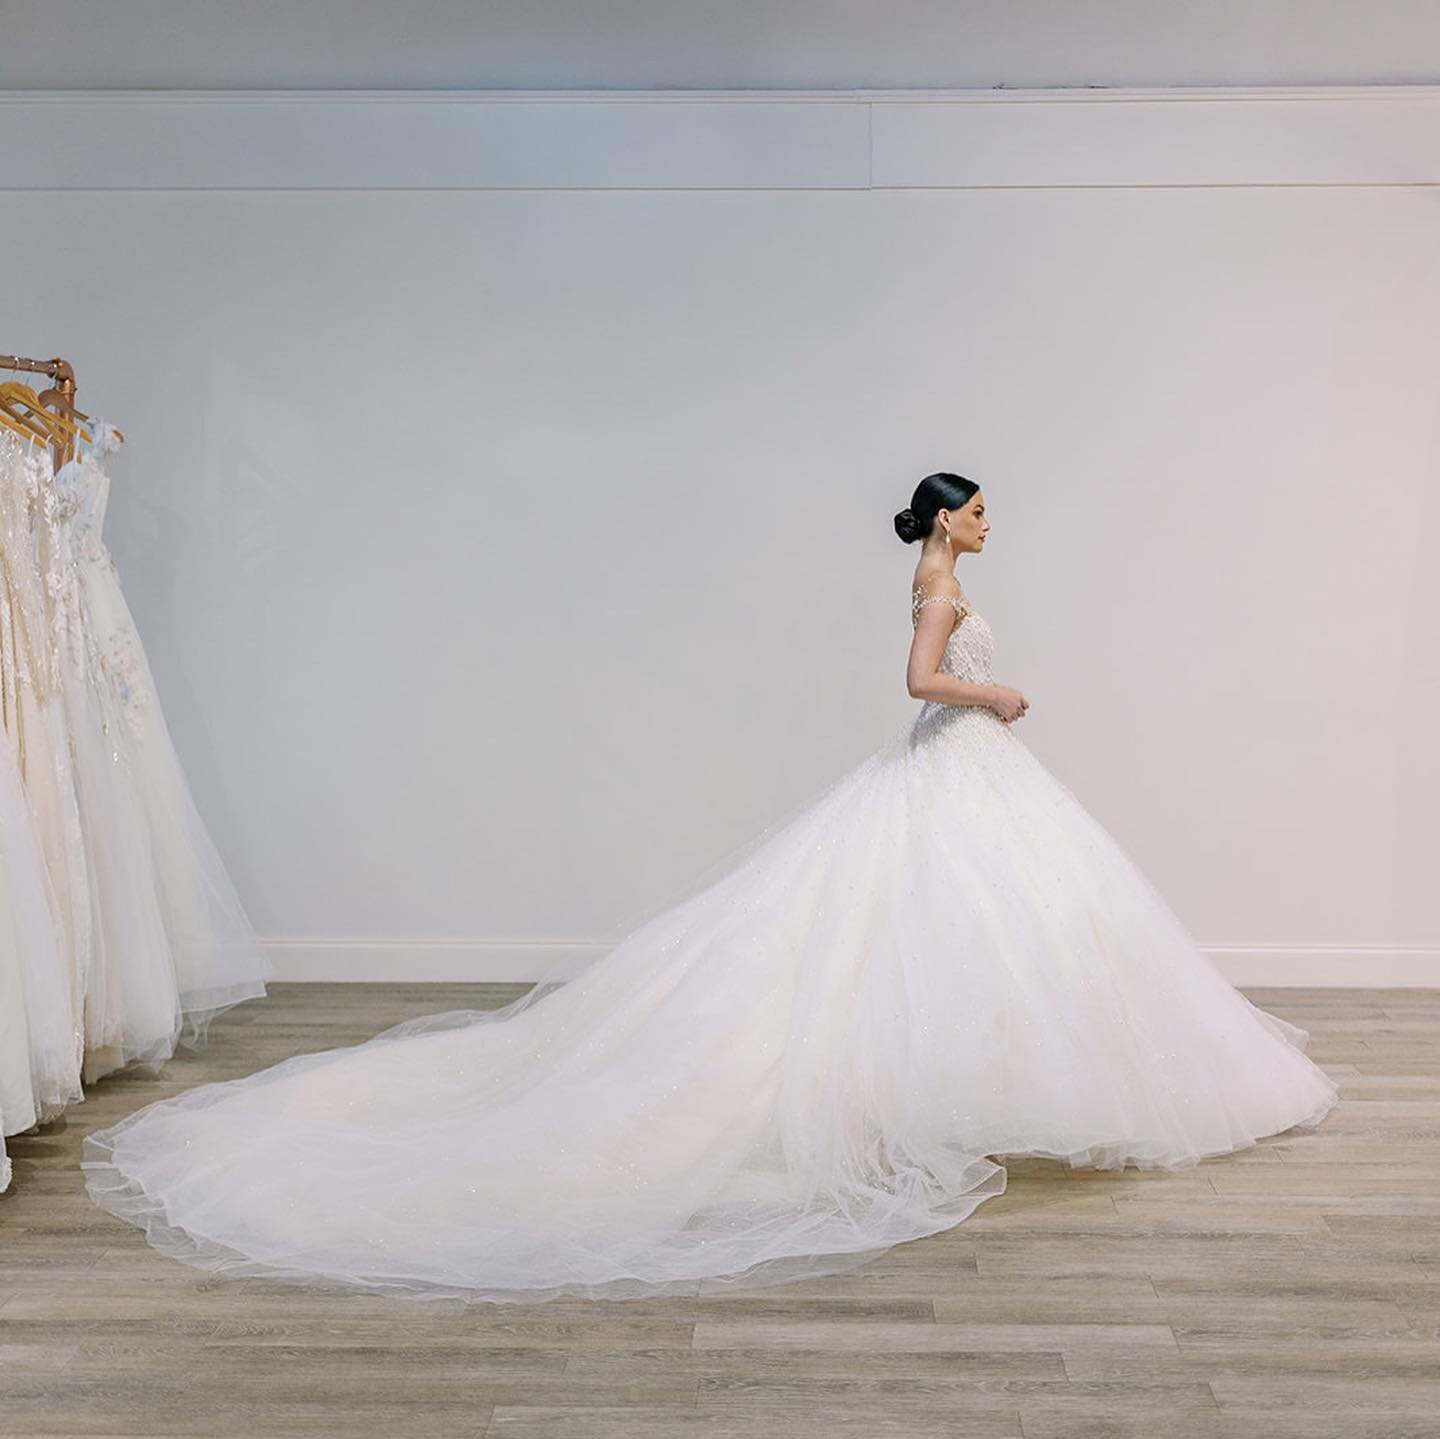 First week of 2022✨ New beginnings &amp; new brides! Our Ines Di Santo Trunk Show is happening Jan. 29 - Feb. 5! Make sure to book your appointment before it&rsquo;s too late!🤍 Who&rsquo;s getting married this year??✨🥰 
.
.
Vendors:
Photographer @k